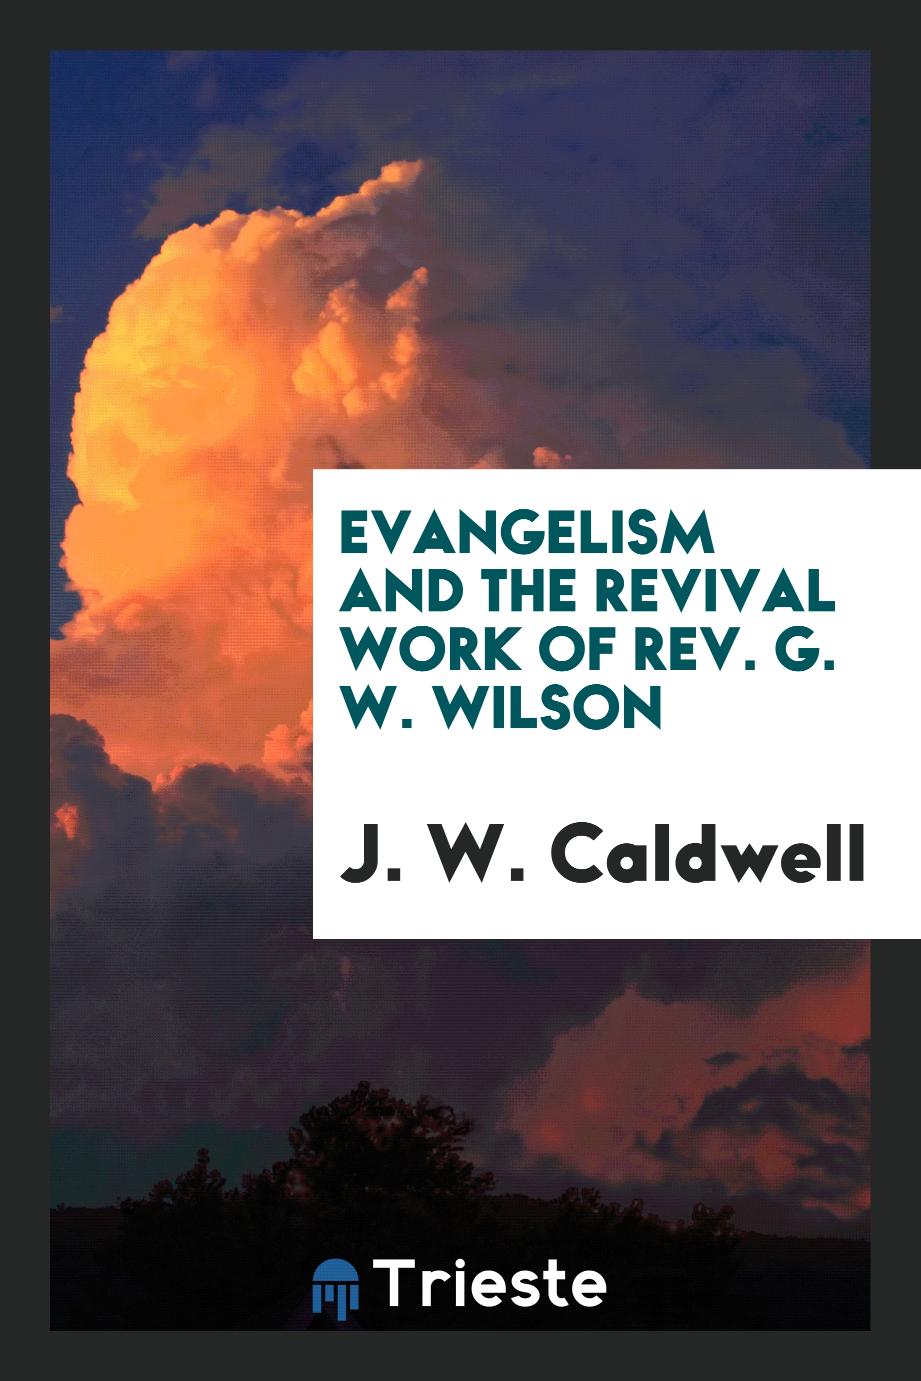 Evangelism and the revival work of Rev. G. W. Wilson